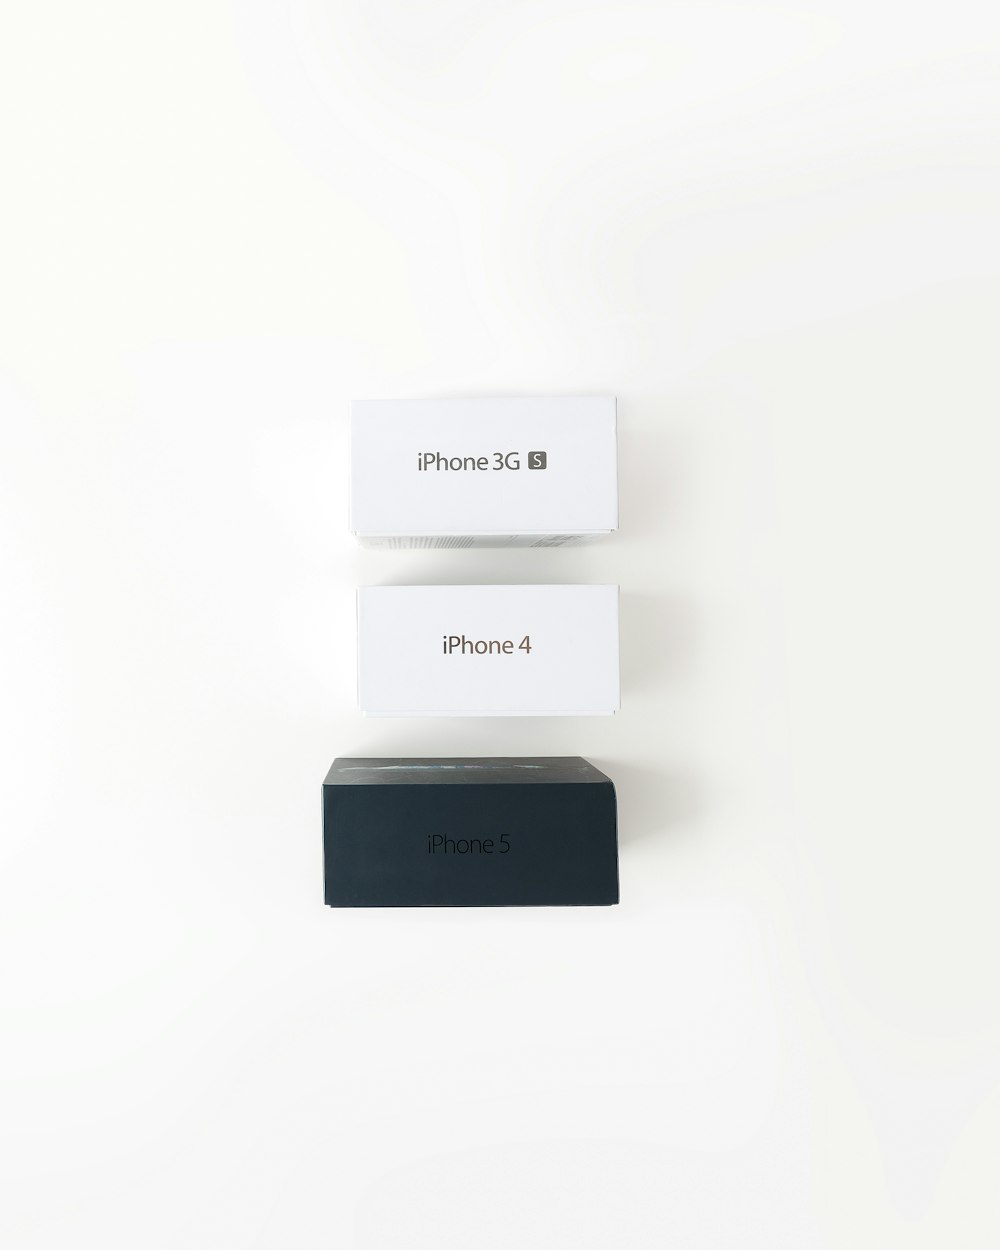 assorted iPhone boxes on white surface